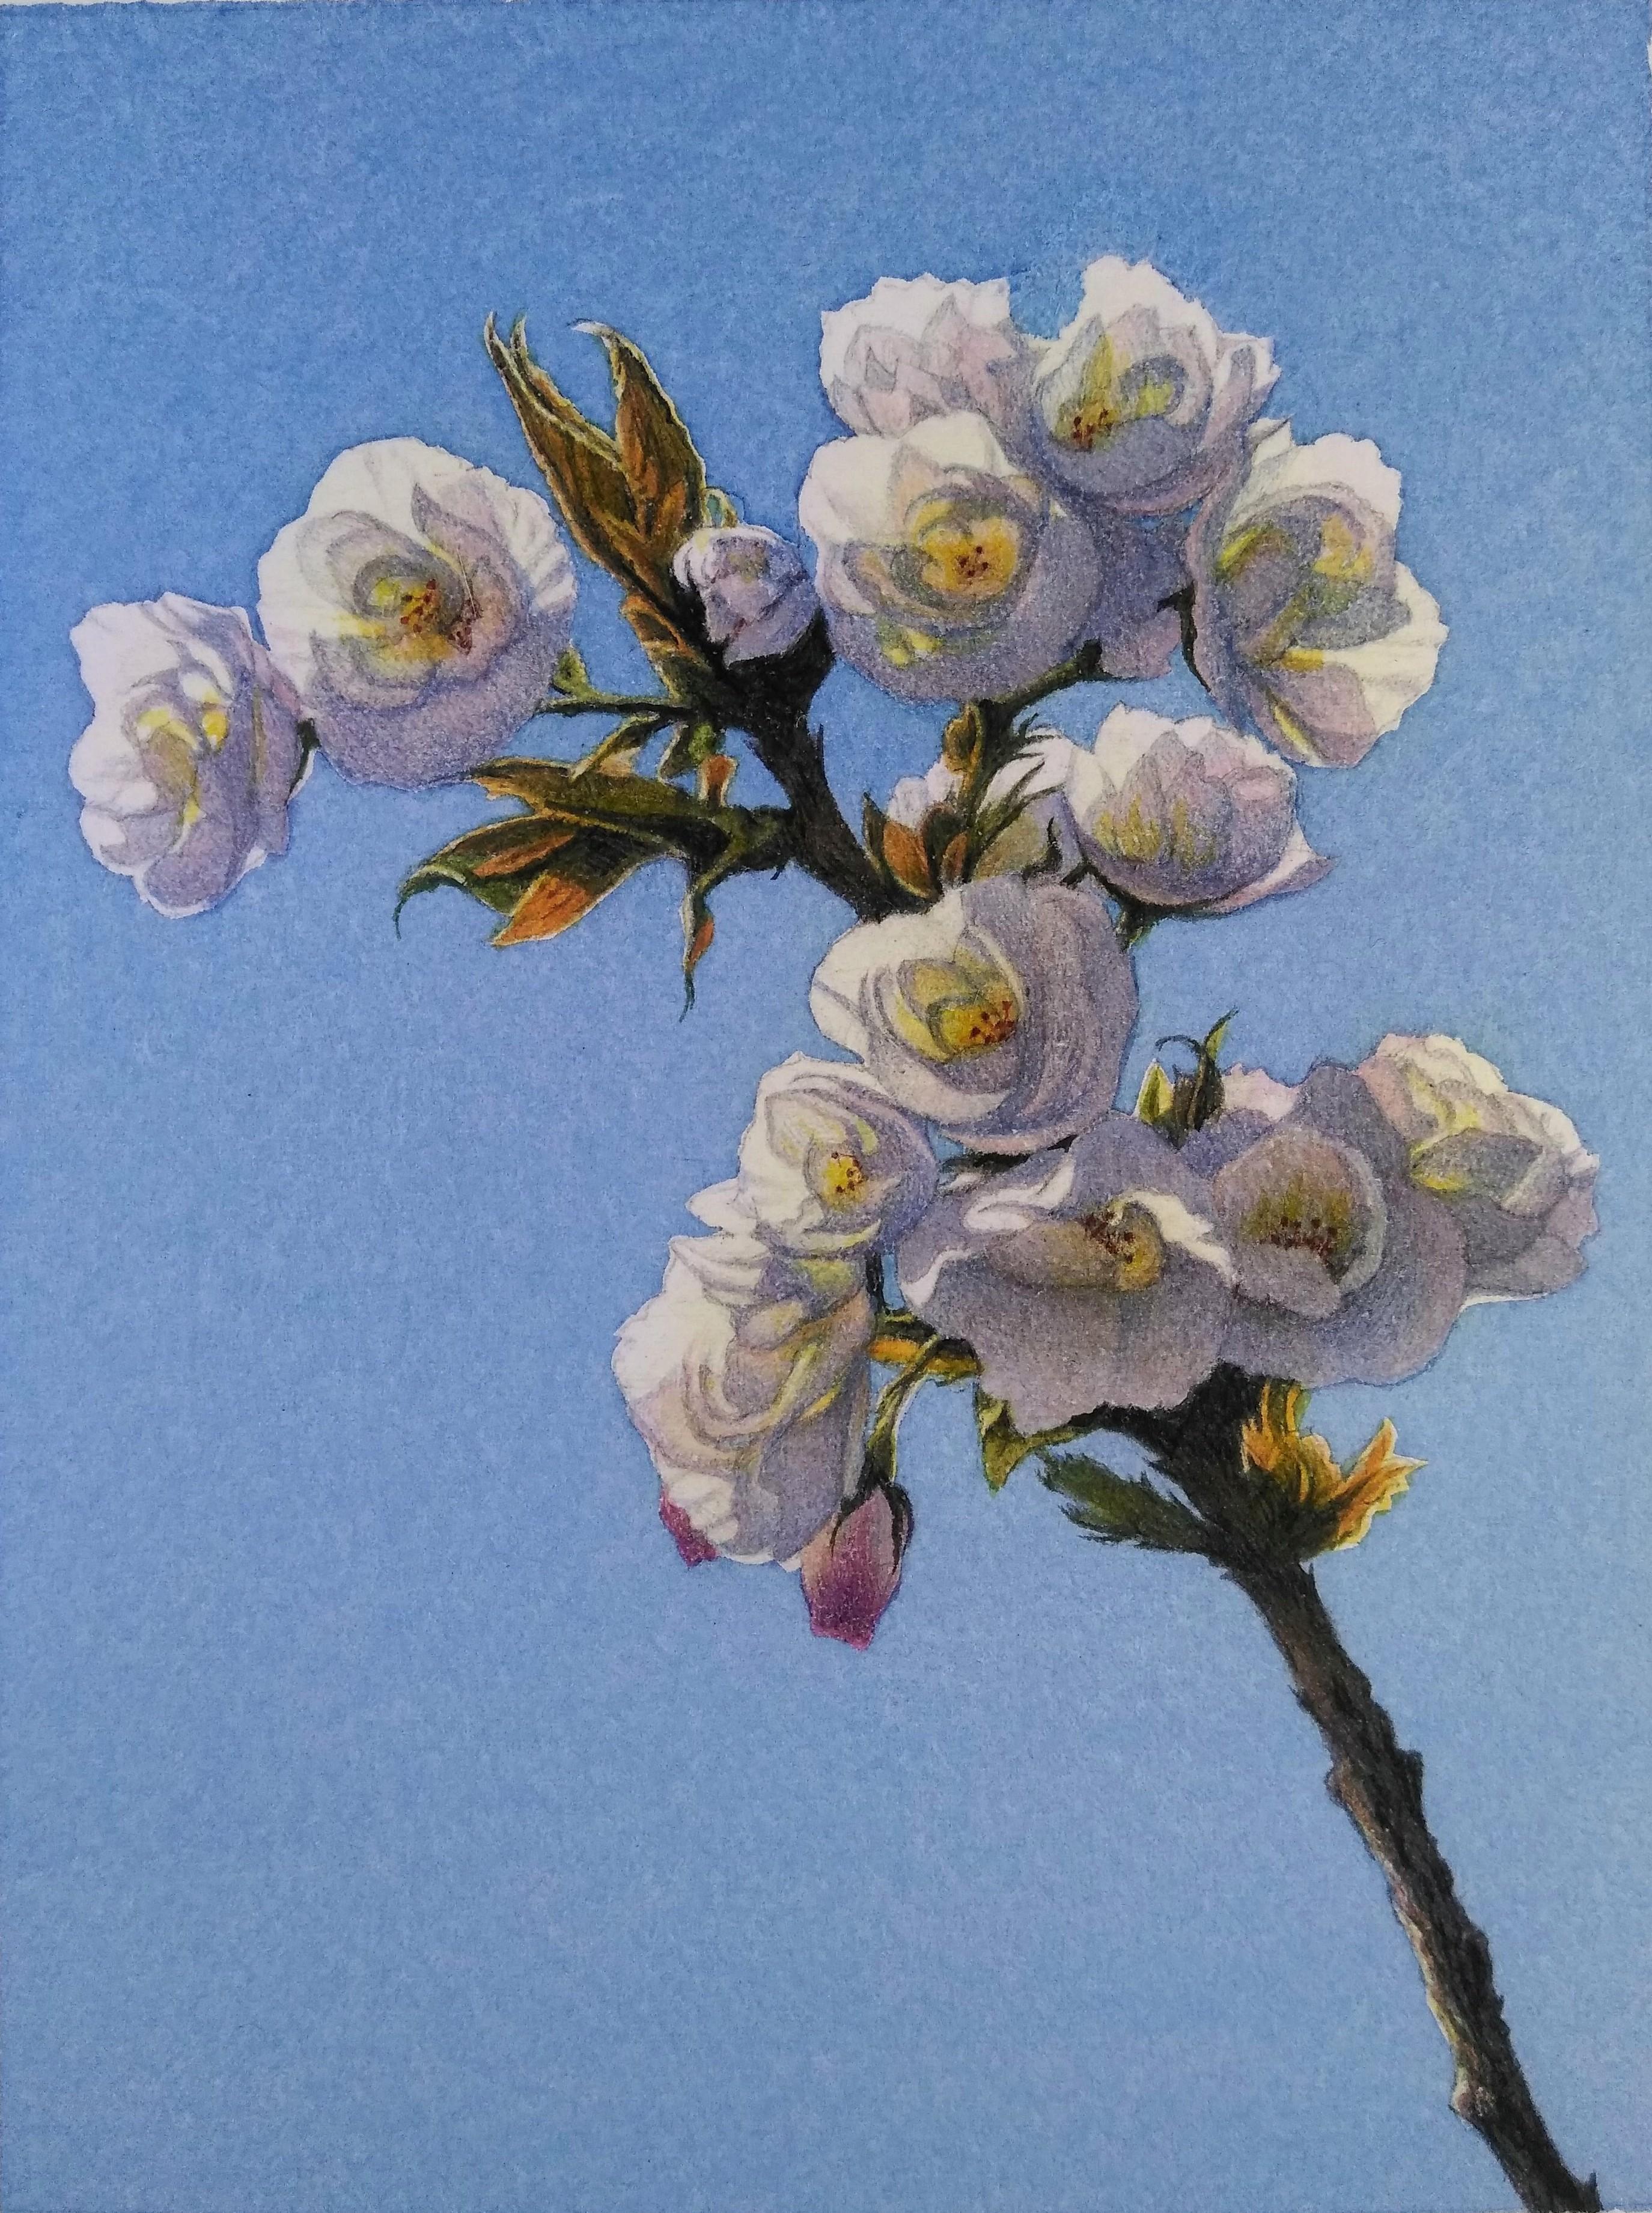 In his watercolor on paper, Cherry Blossom, Frederick Brosen renders the tender white bloom in minute detail. The result of careful observation, Brosen achieves clarity in his representation without losing its softness and delicacy. The manner in